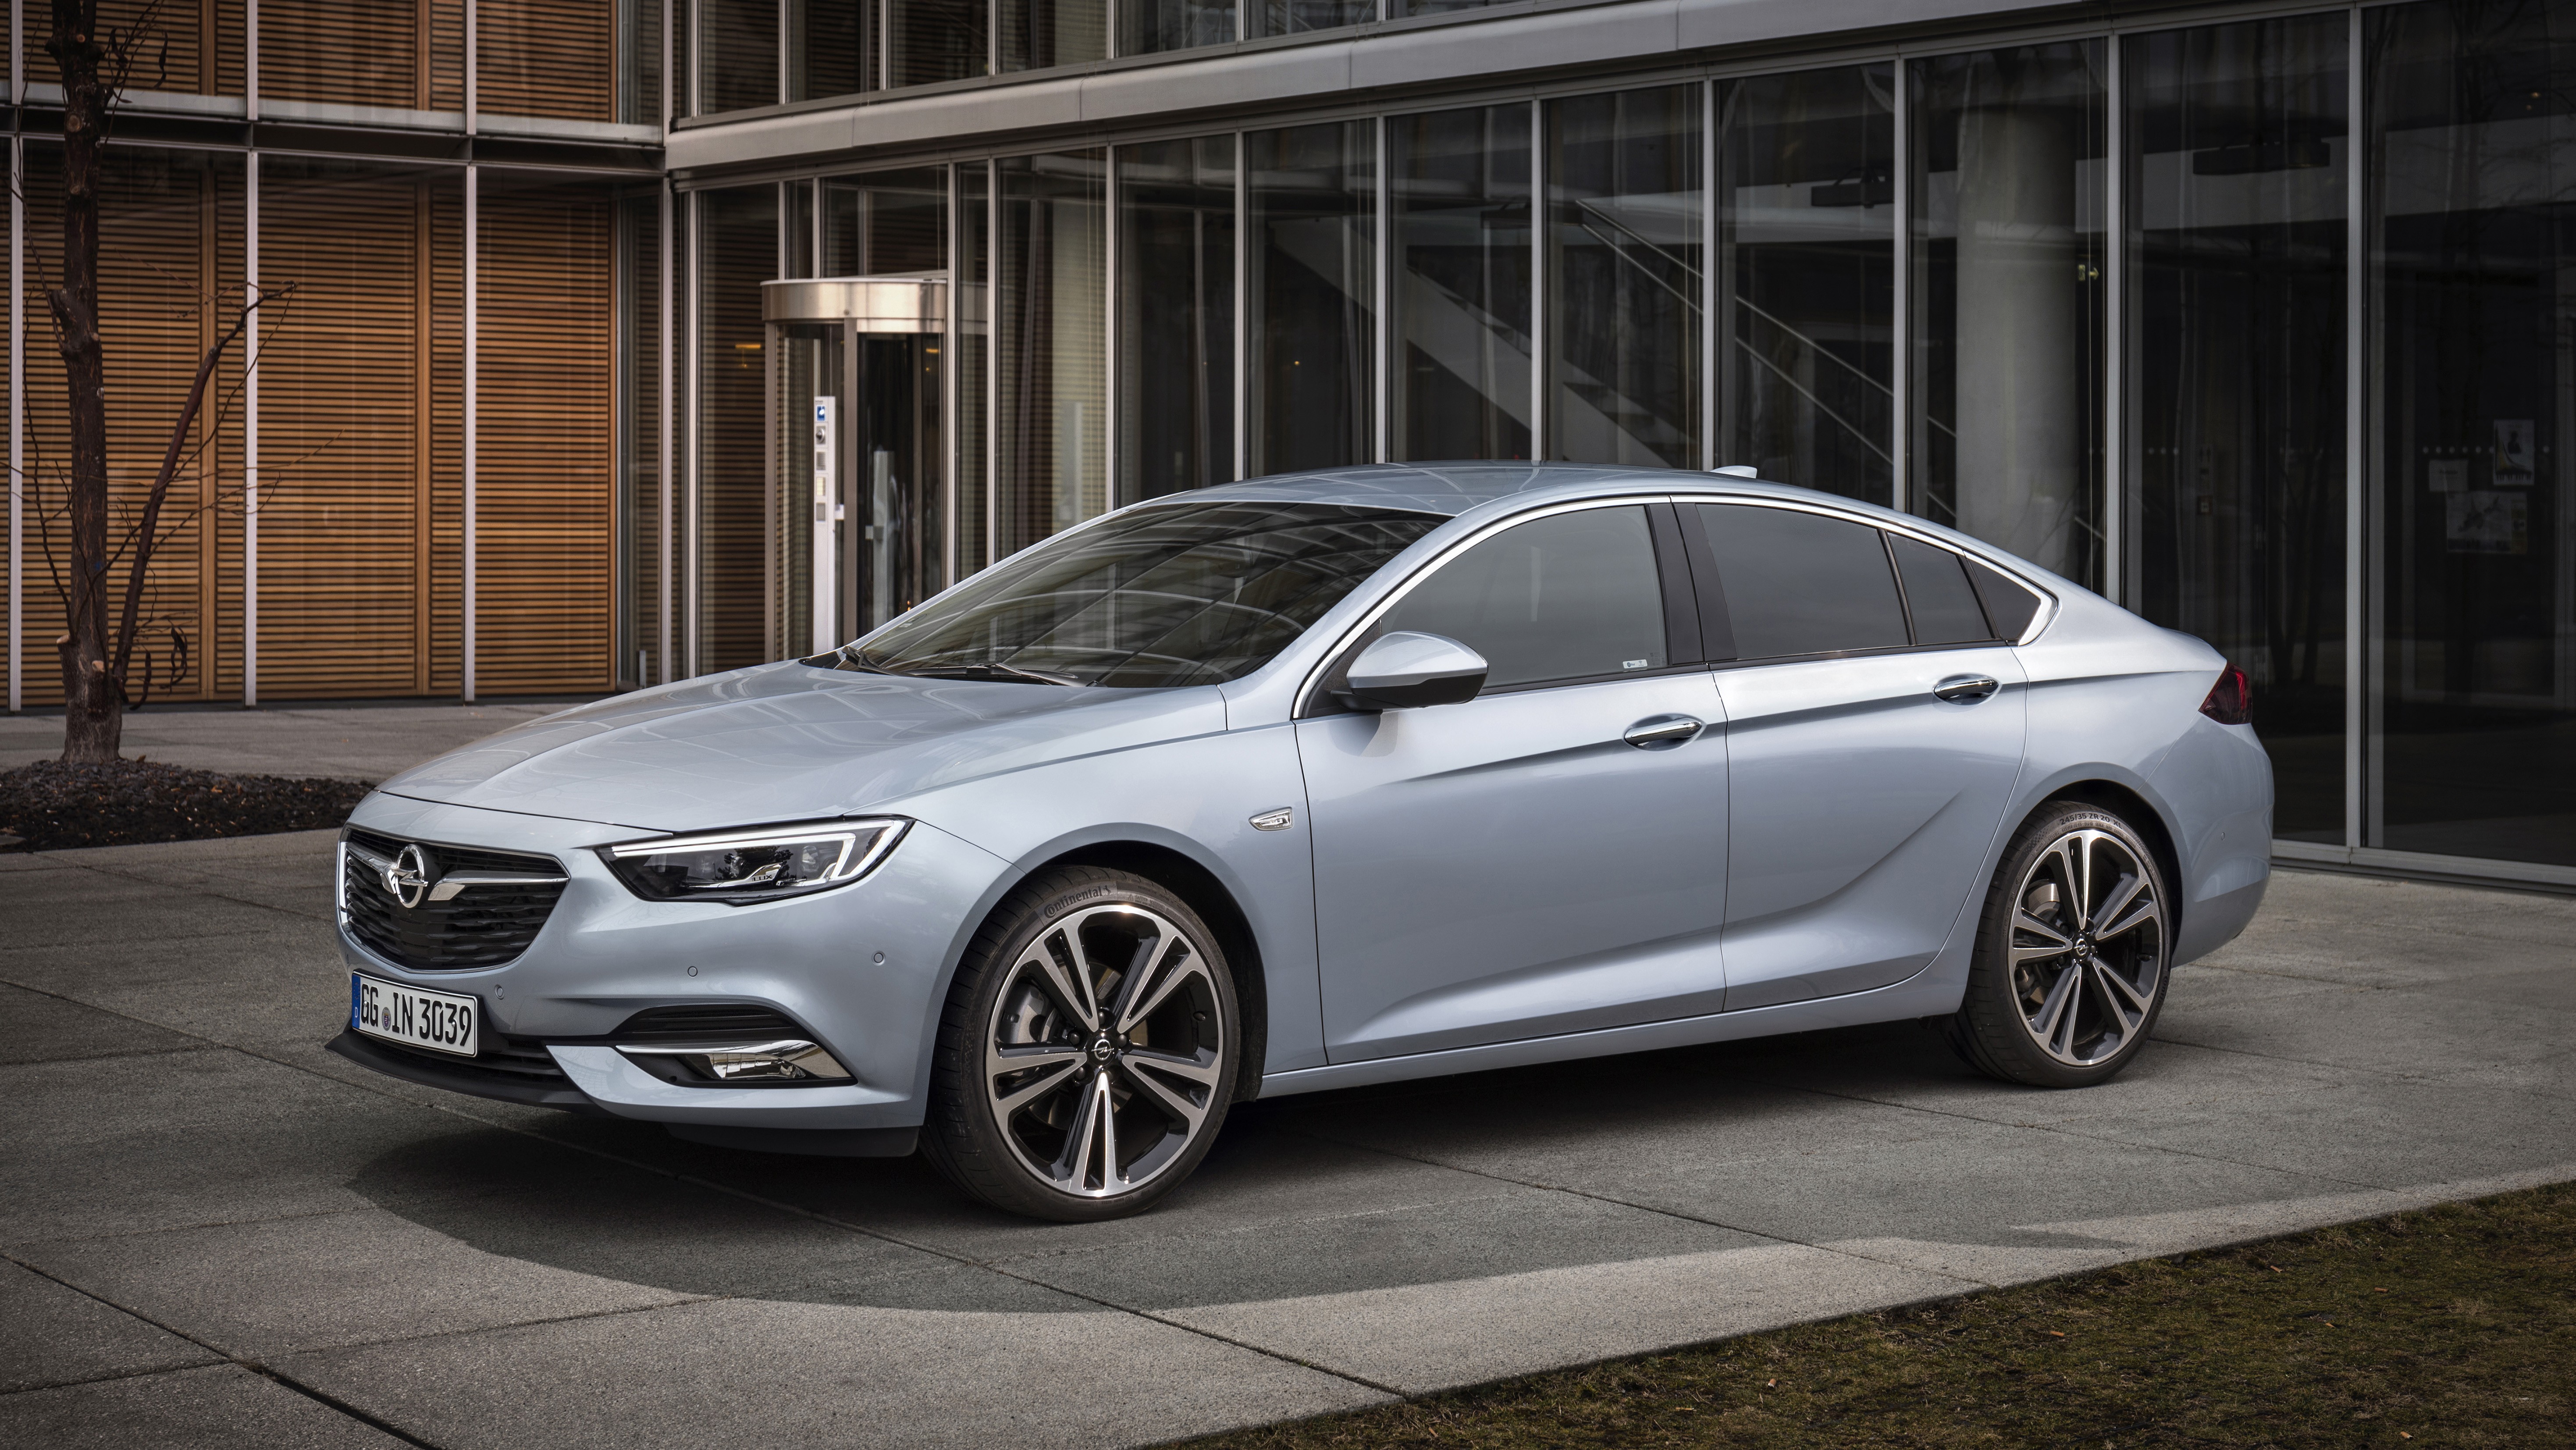 Opel Insignia Sports Tourer images (34 of 35)